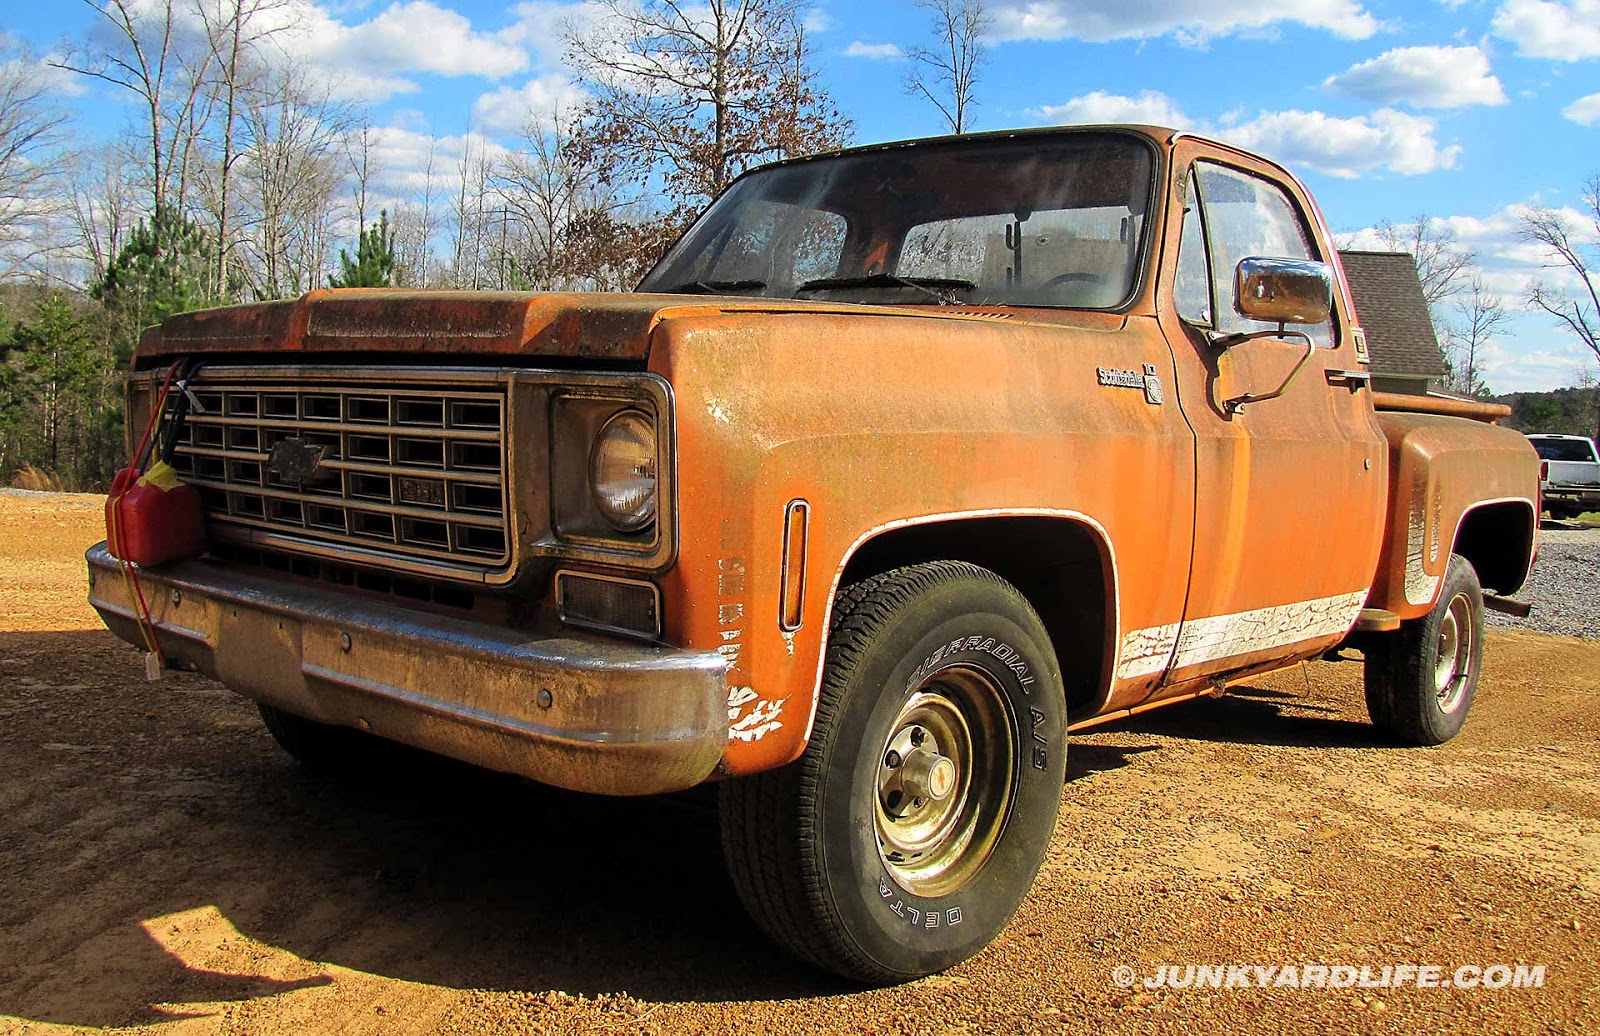 Junkyard Life: Classic Cars, Muscle Cars, Barn finds, Hot rods and part ...